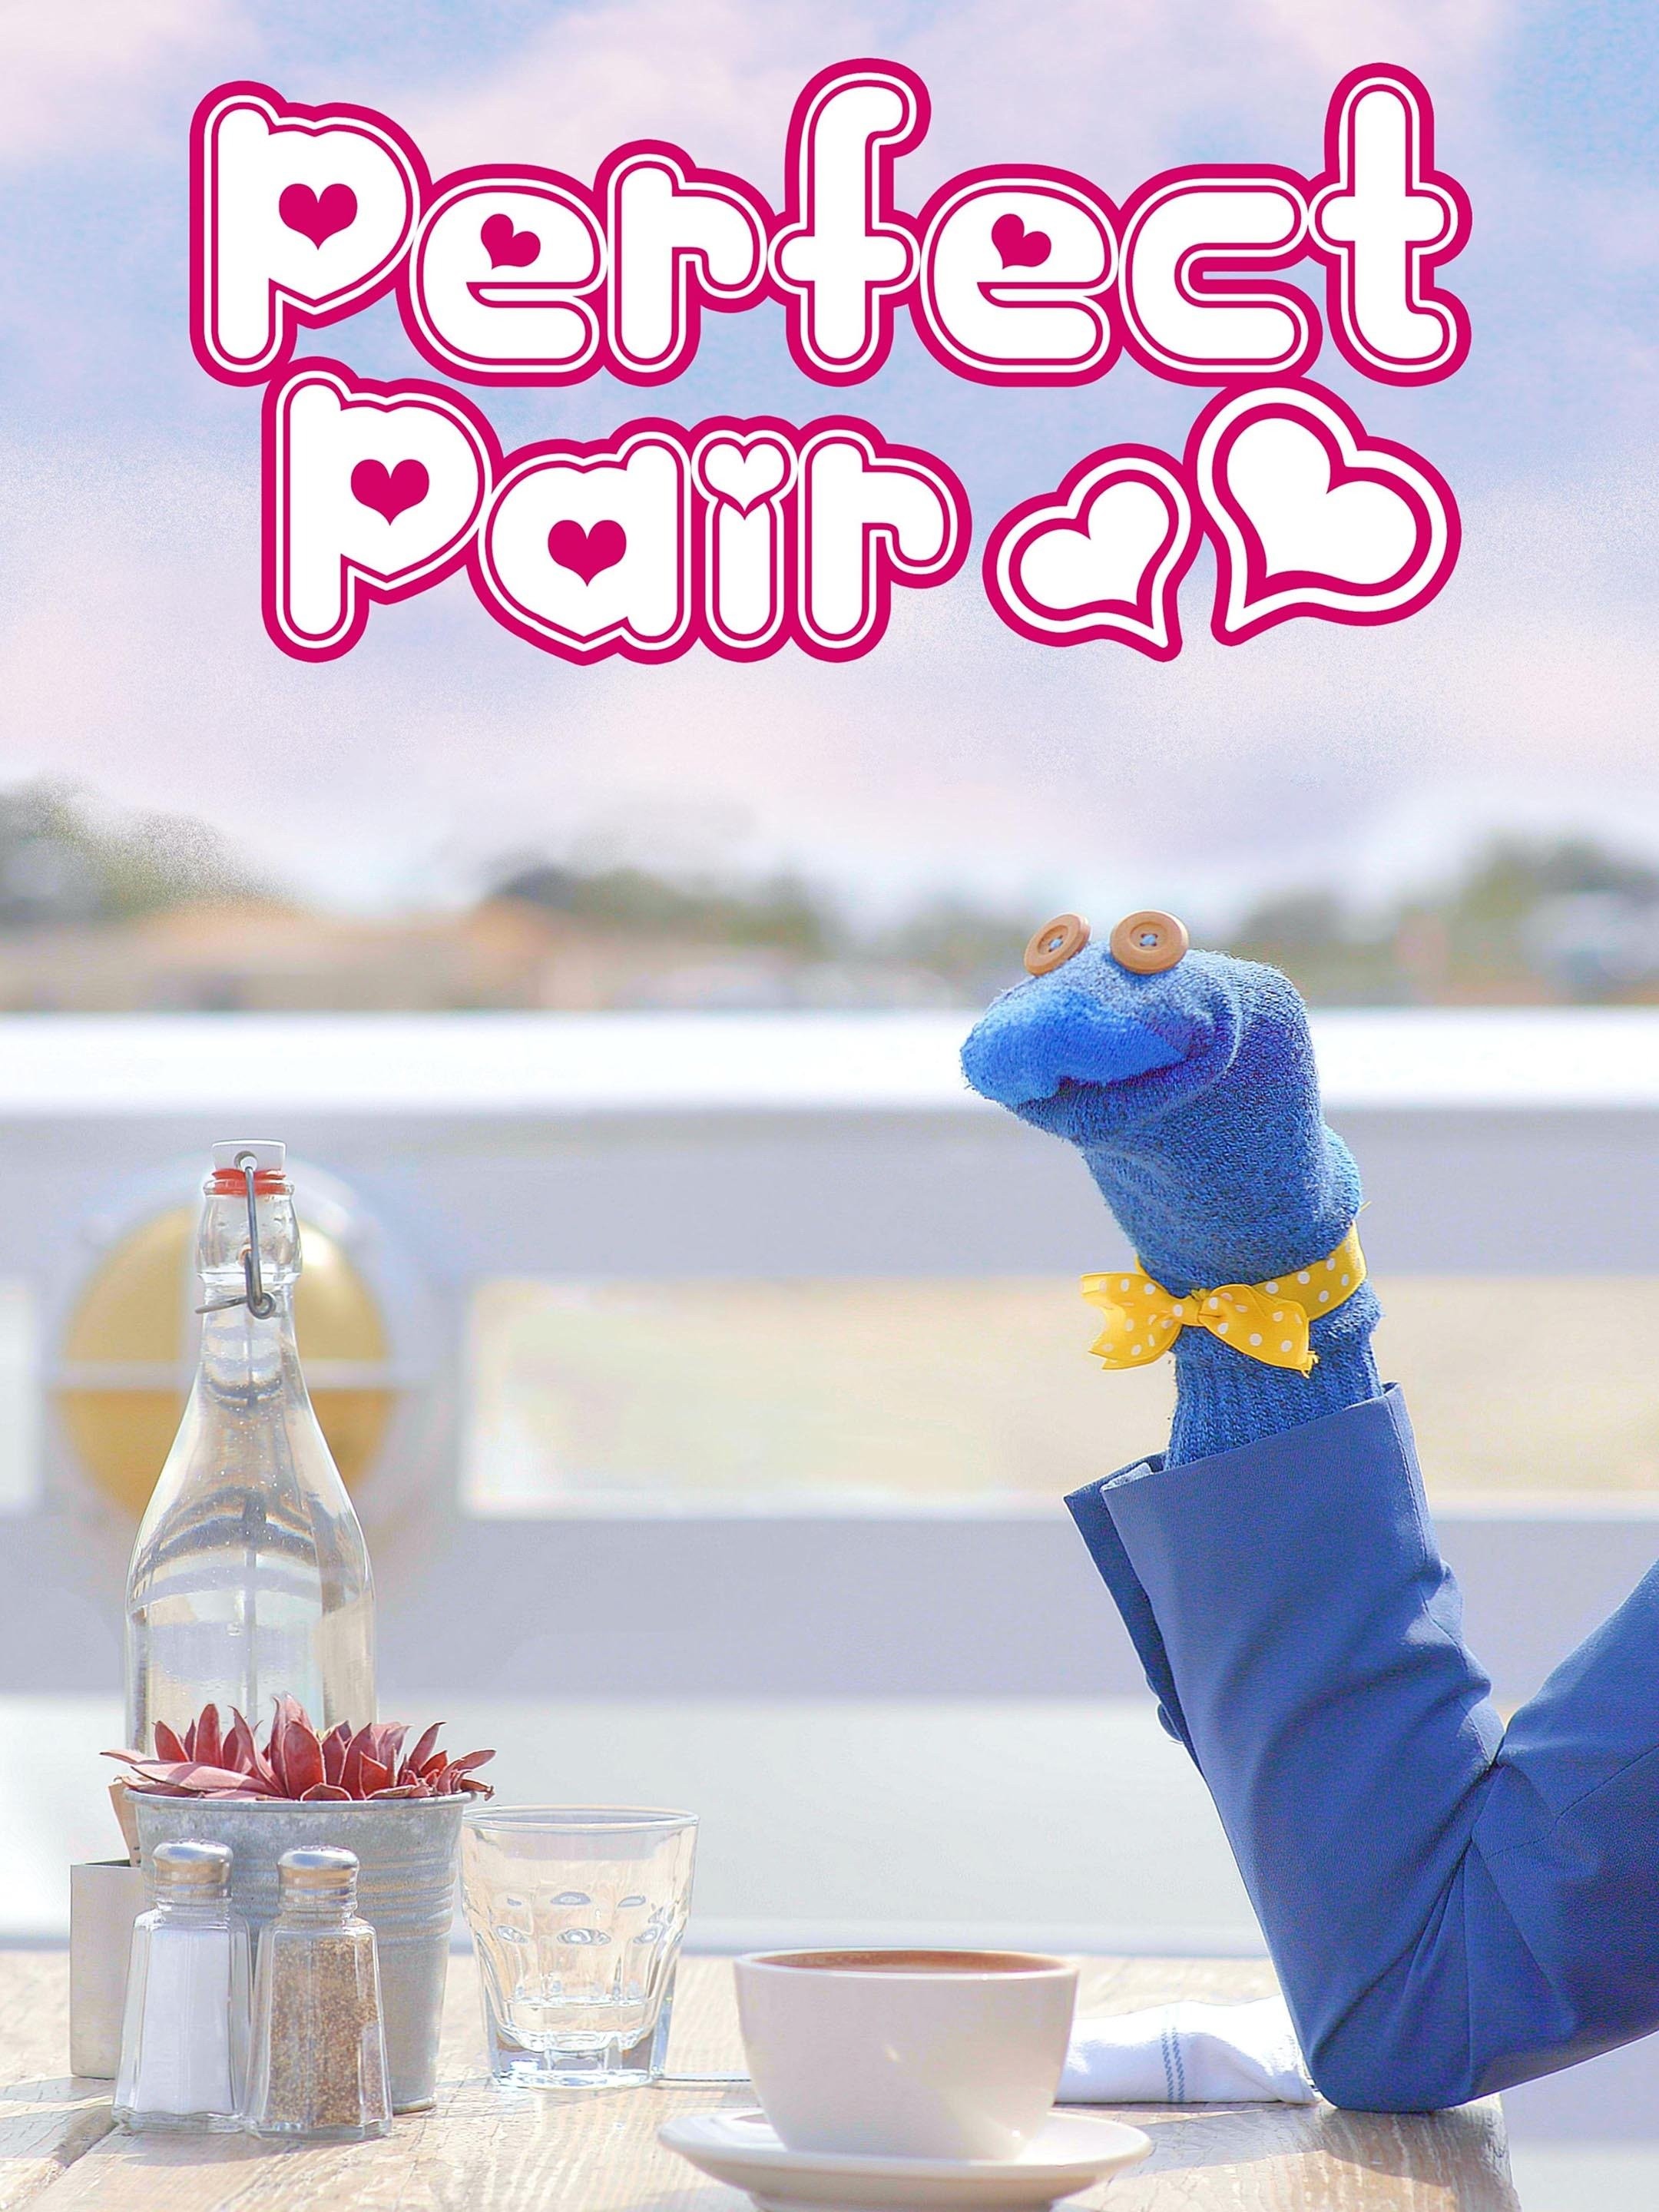 Perfect Pair Productions